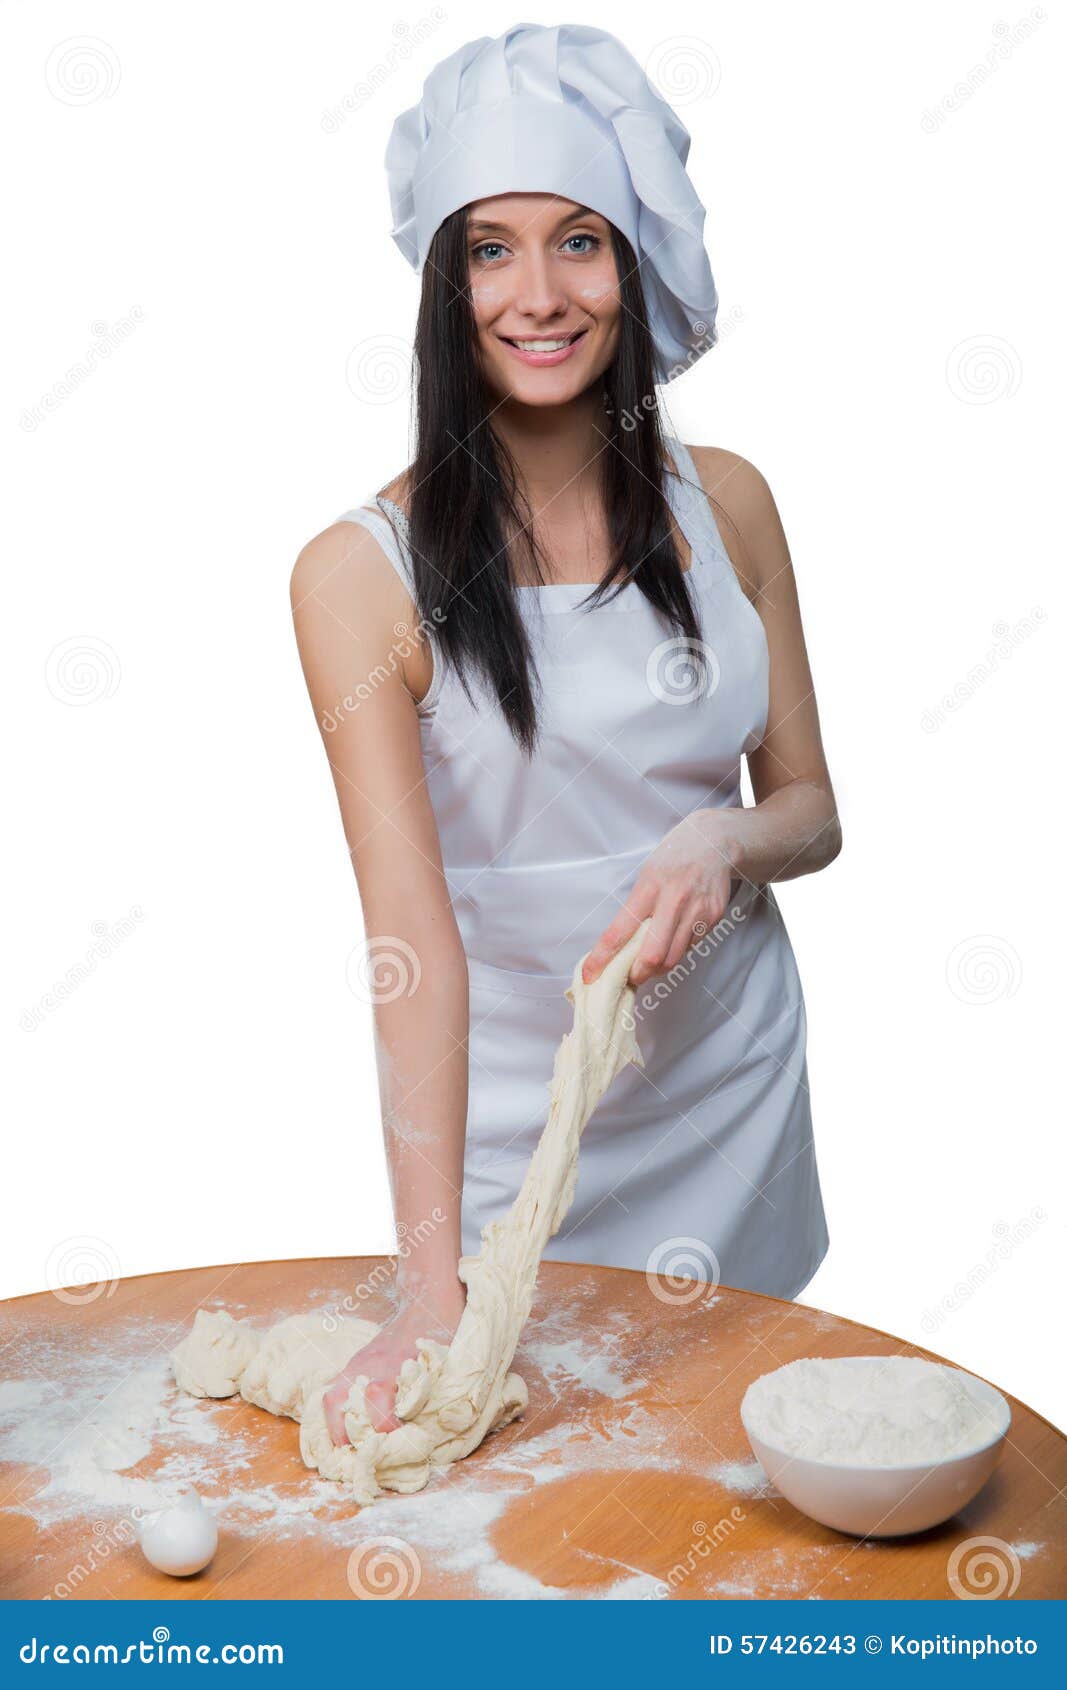 Woman in Chef Uniform Knead the Dough Stock Image - Image of chef ...